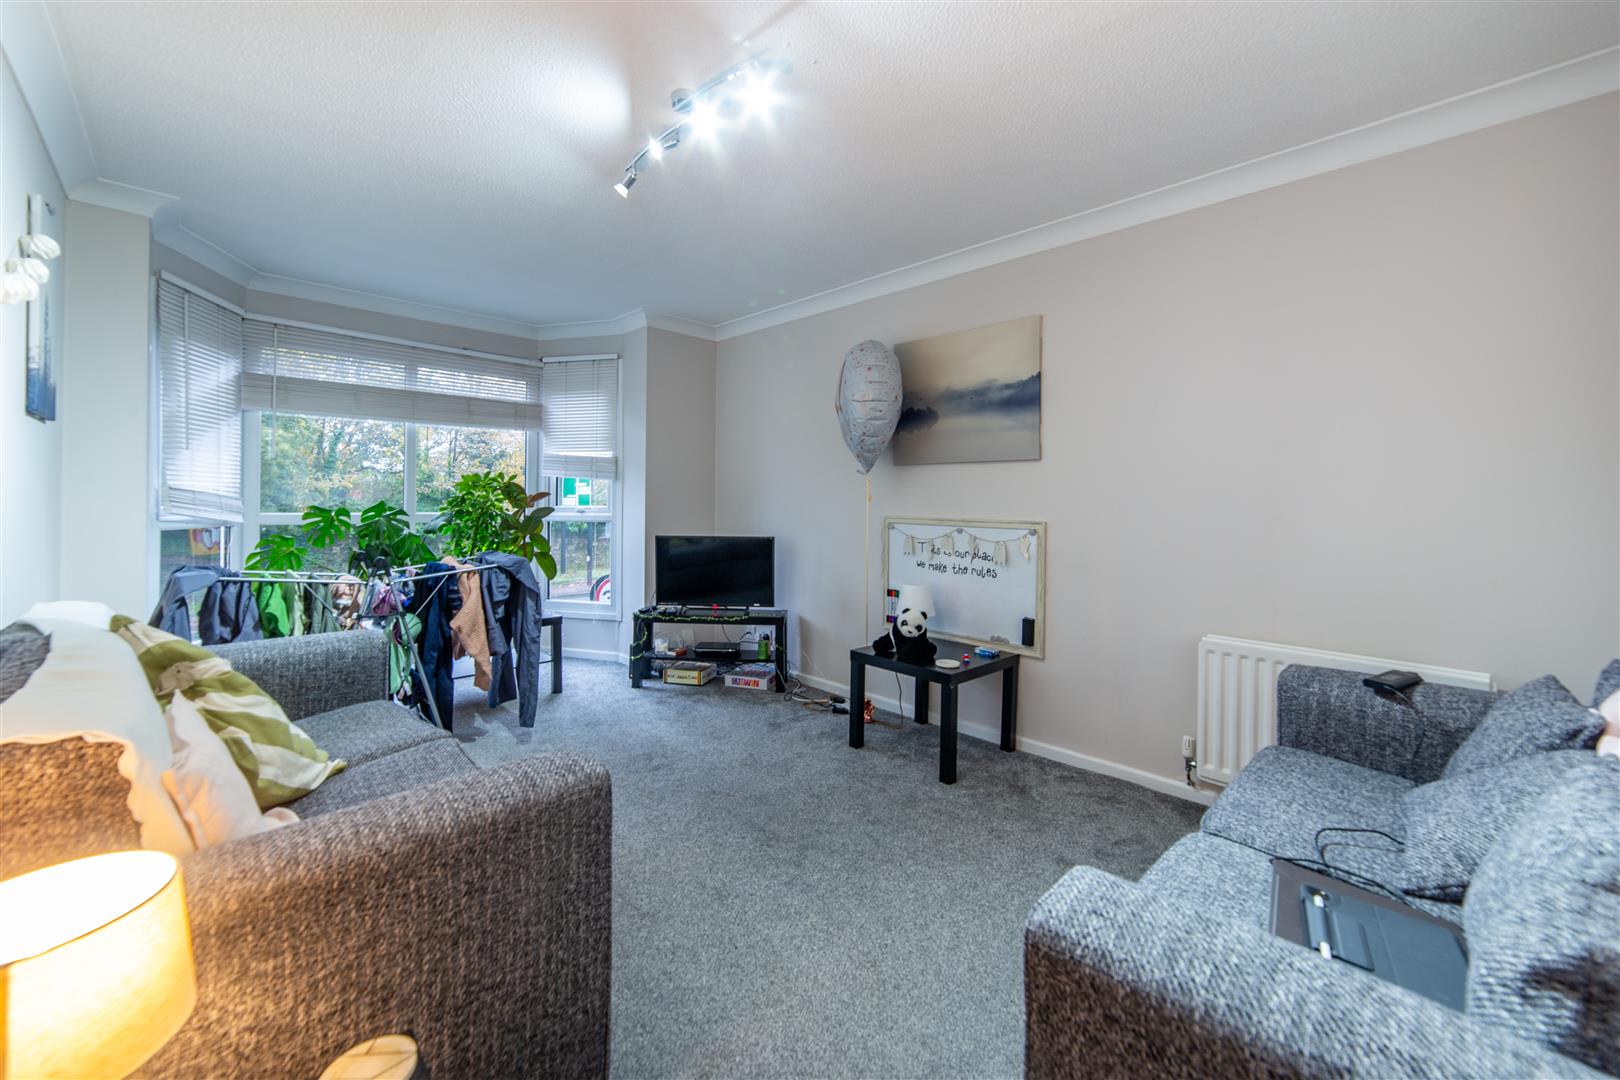 3 bed apartment to rent in Akenside Terrace, Jesmond - Property Image 1